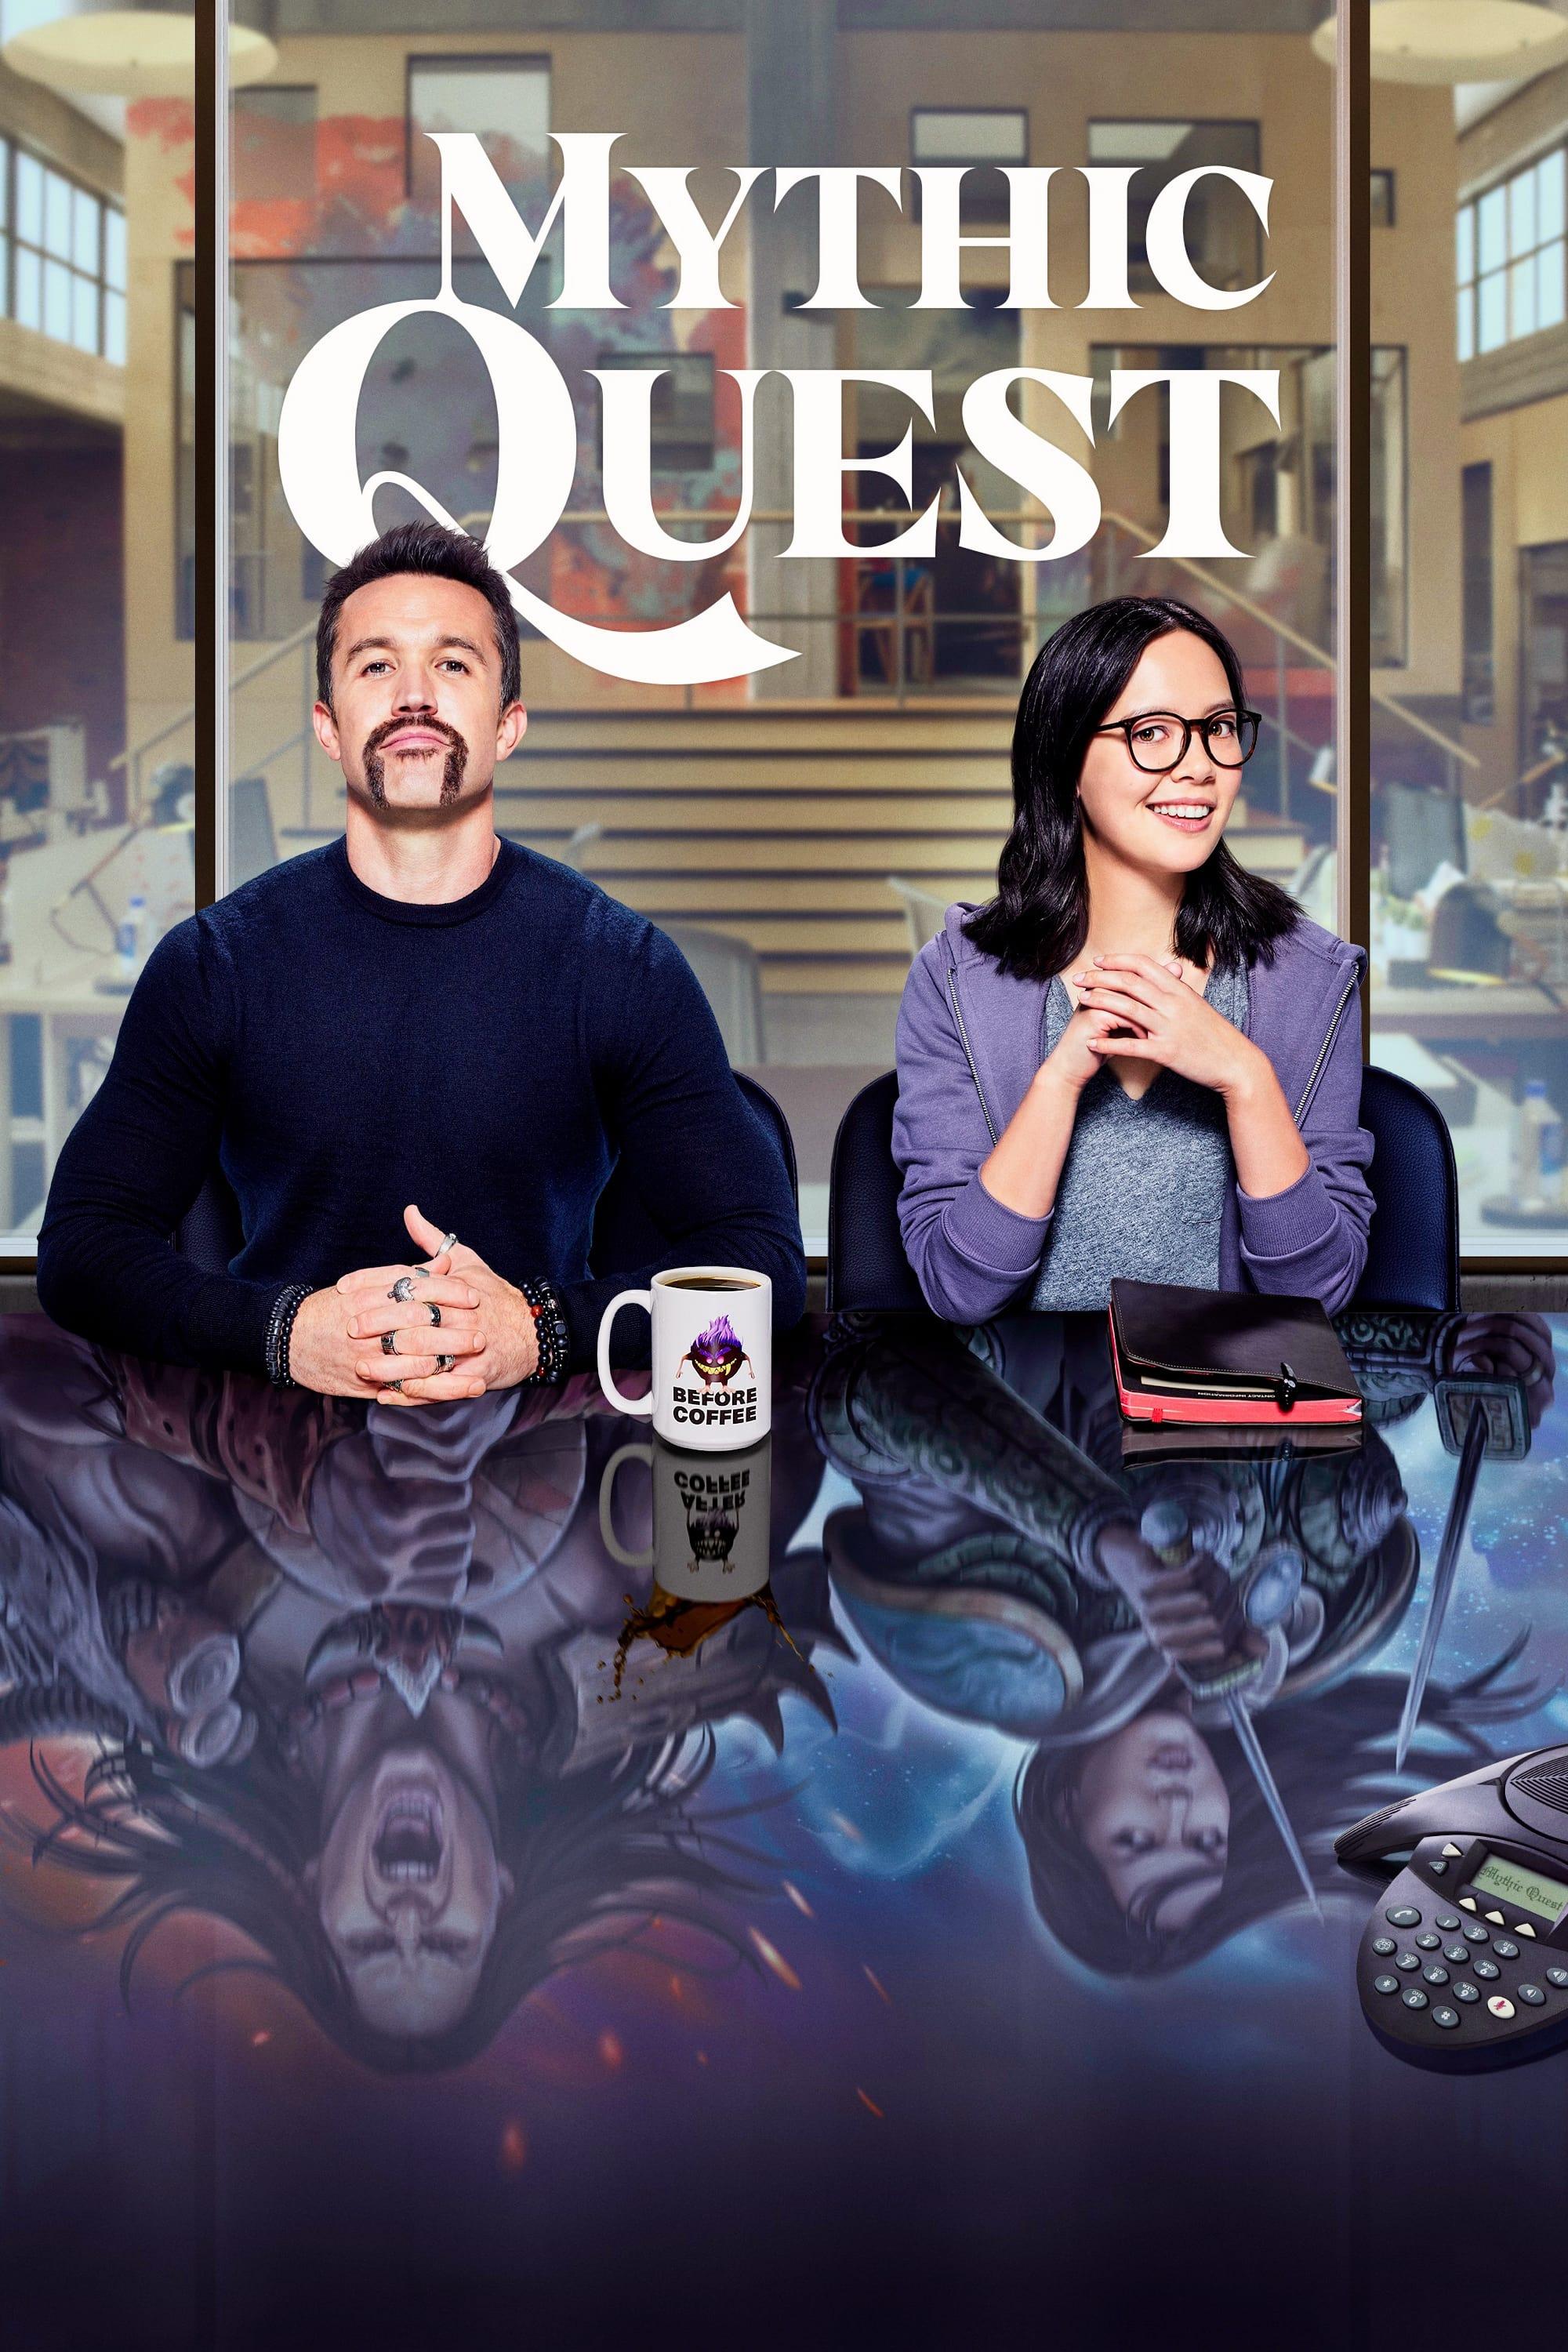 Mythic Quest poster